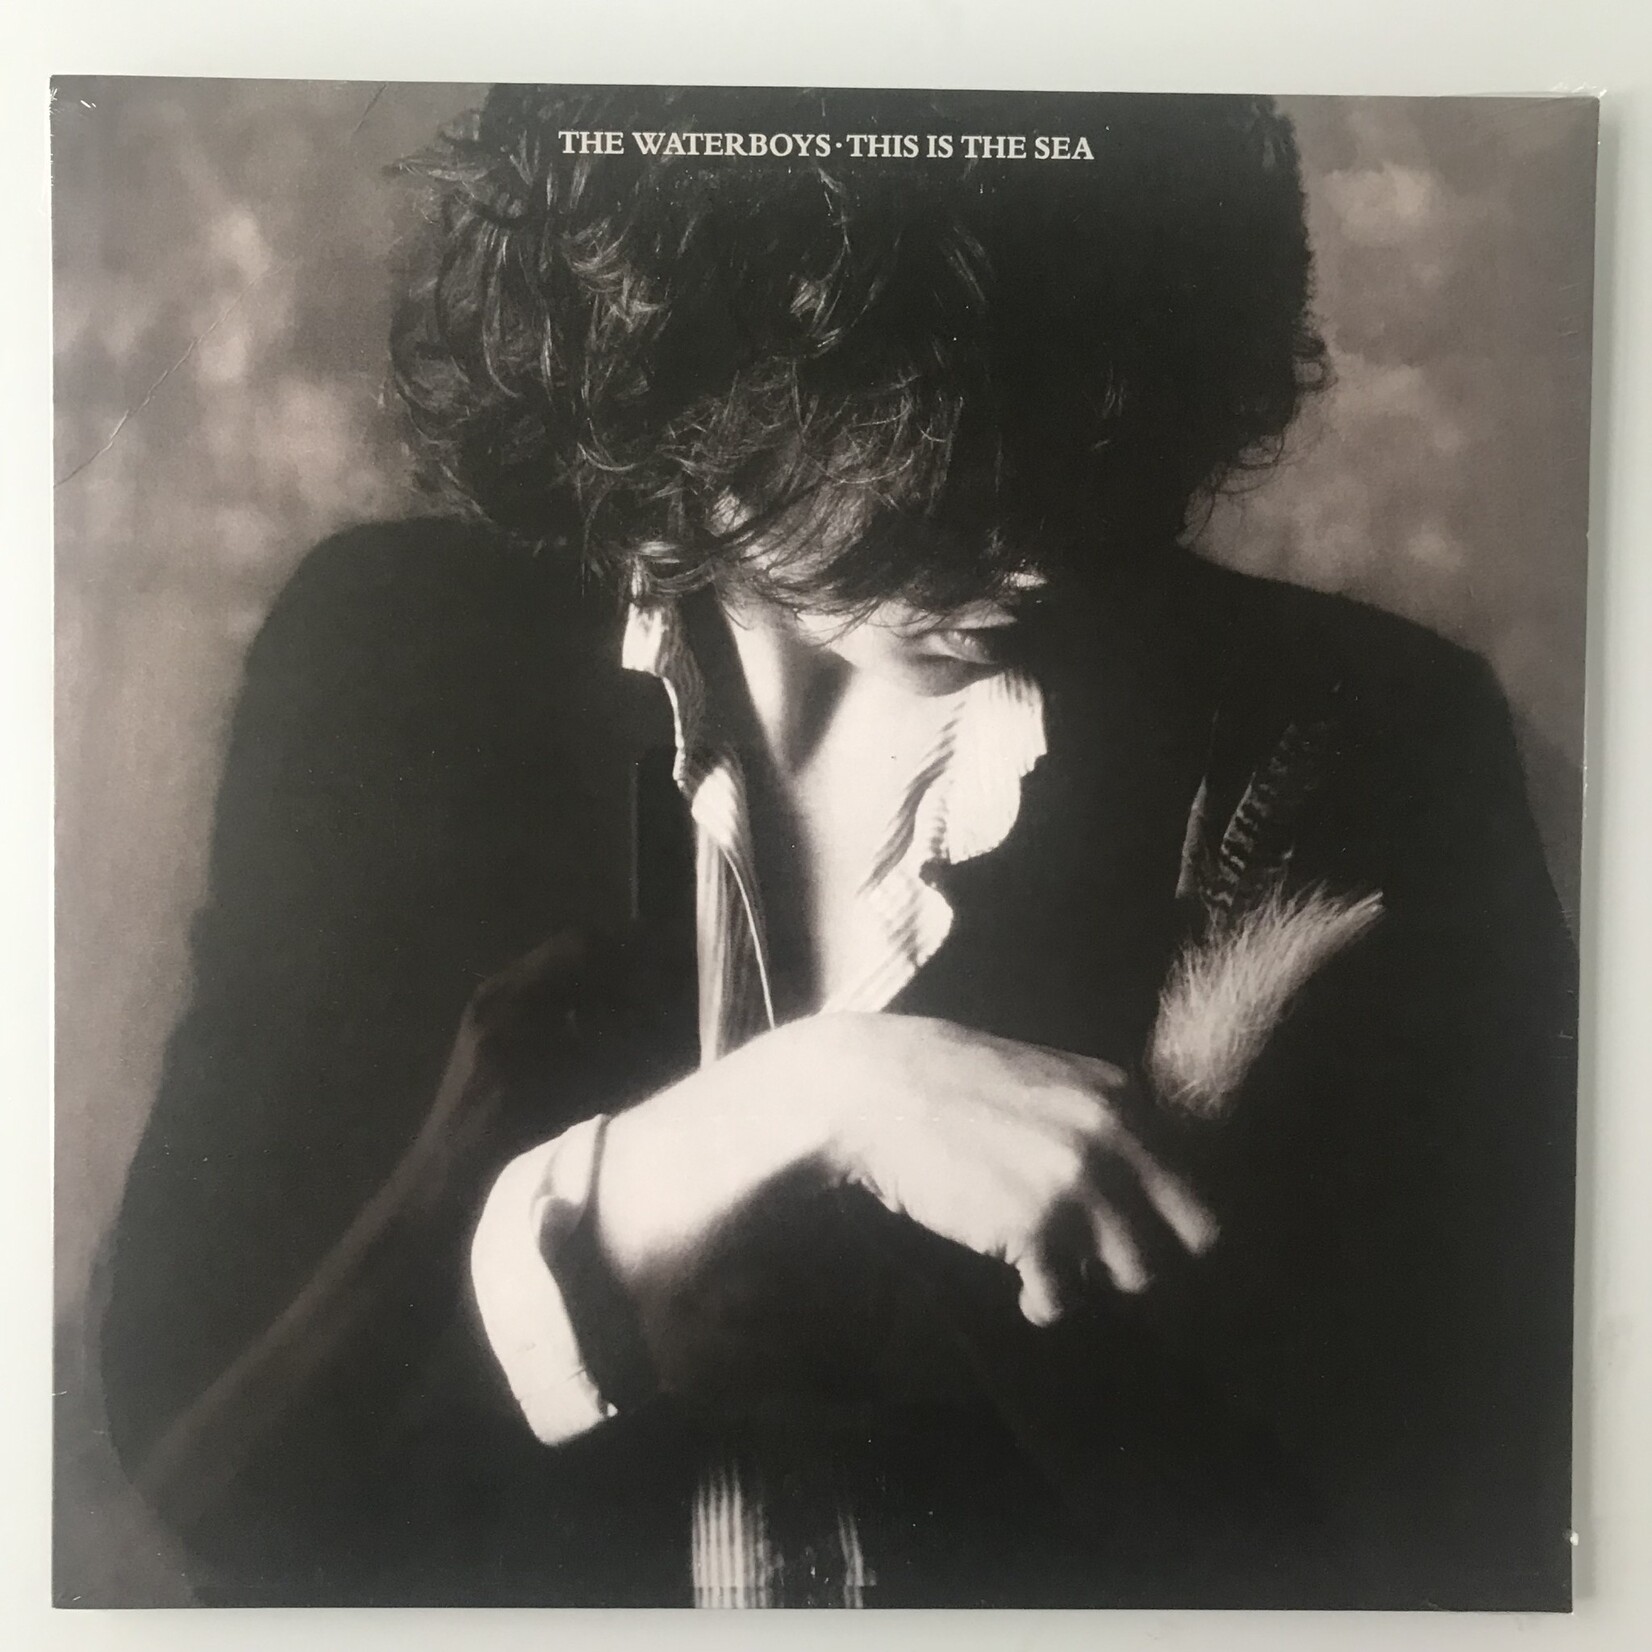 Waterboys - This Is The Sea - Vinyl LP (NEW)